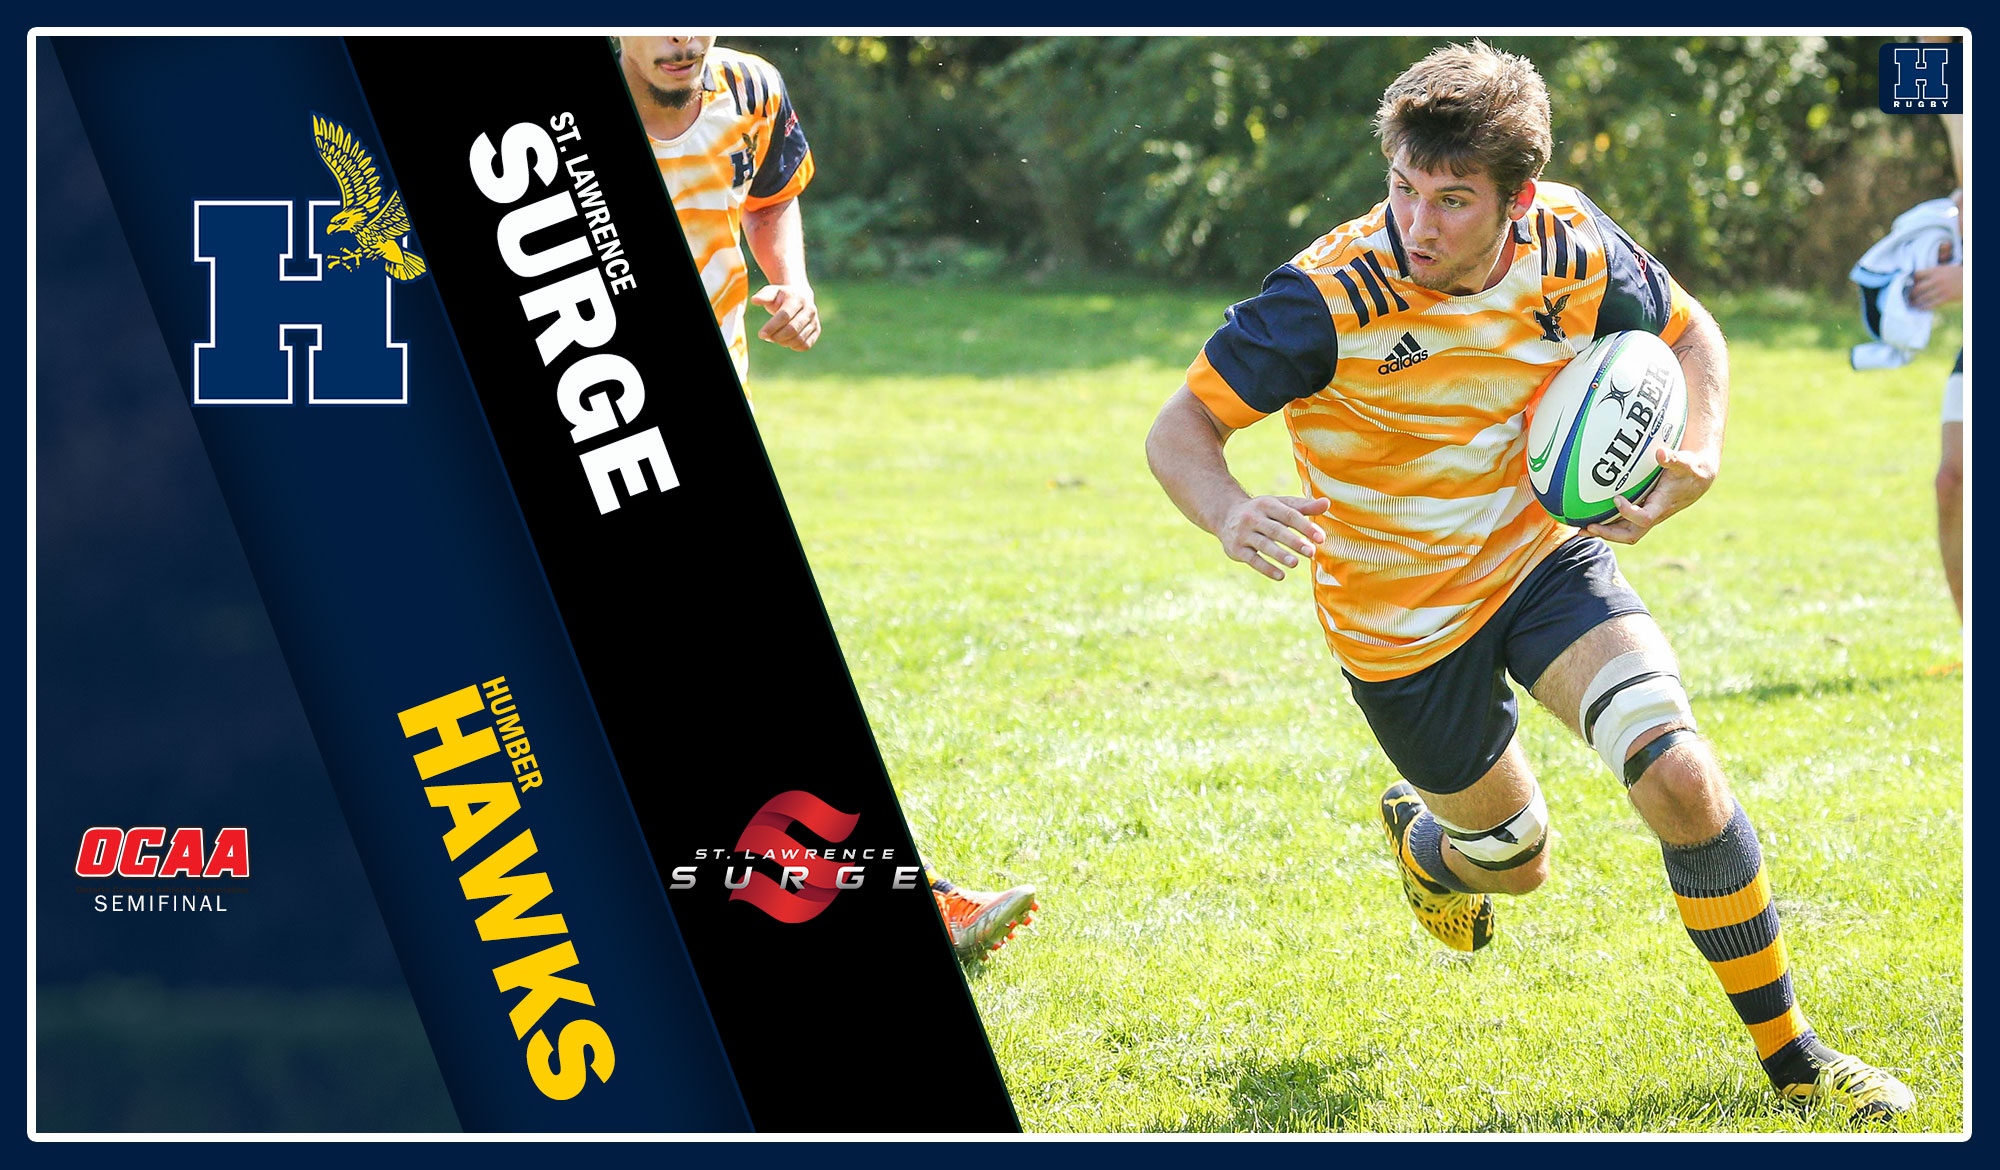 OCAA Semifinal Preview - Humber at St. Lawrence